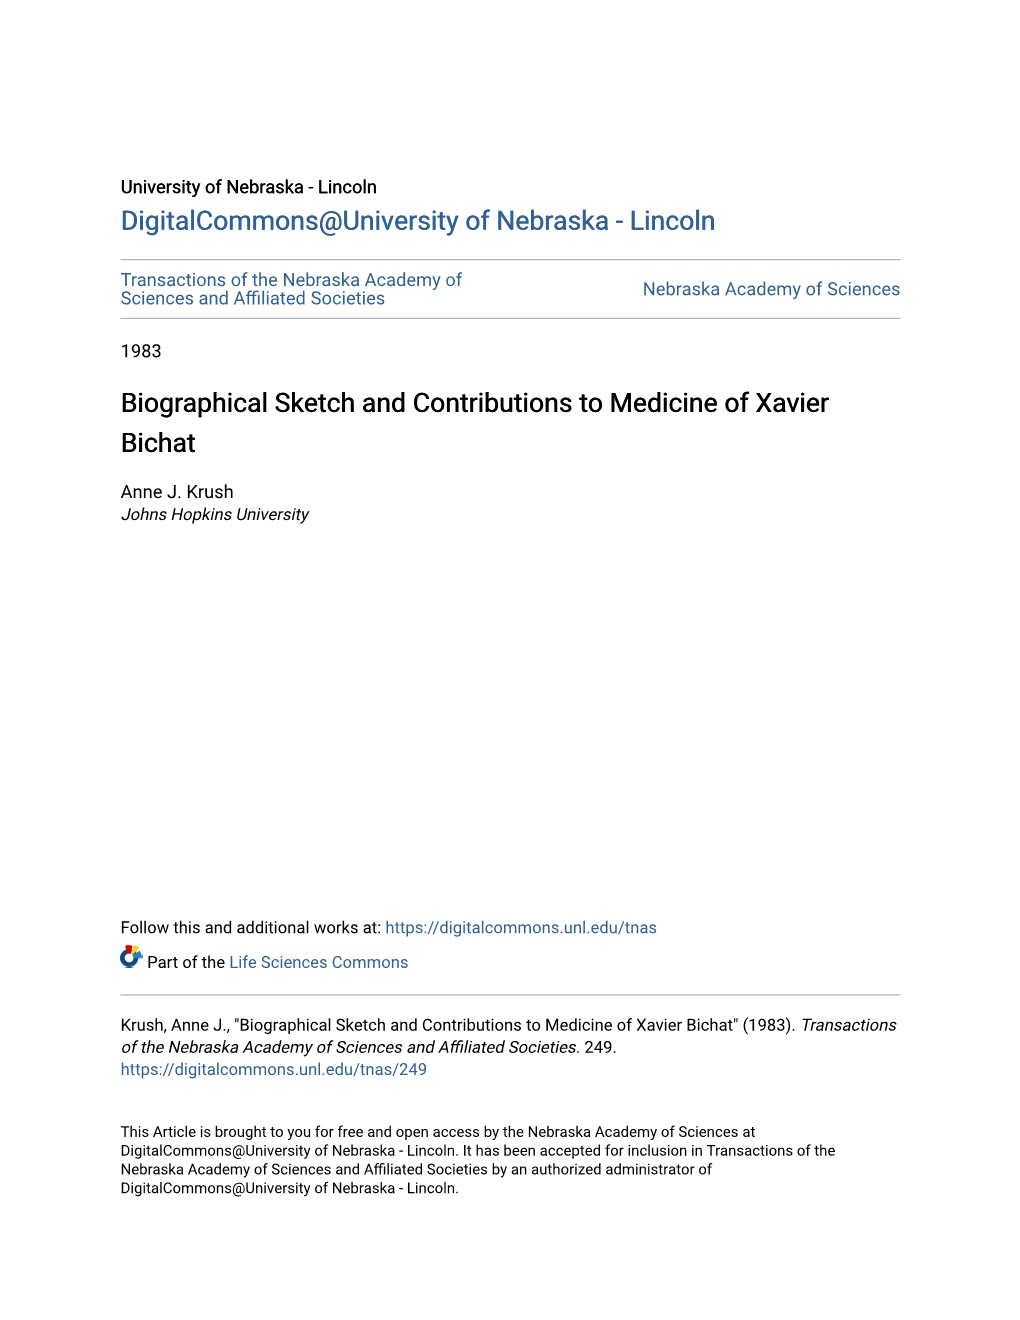 Biographical Sketch and Contributions to Medicine of Xavier Bichat